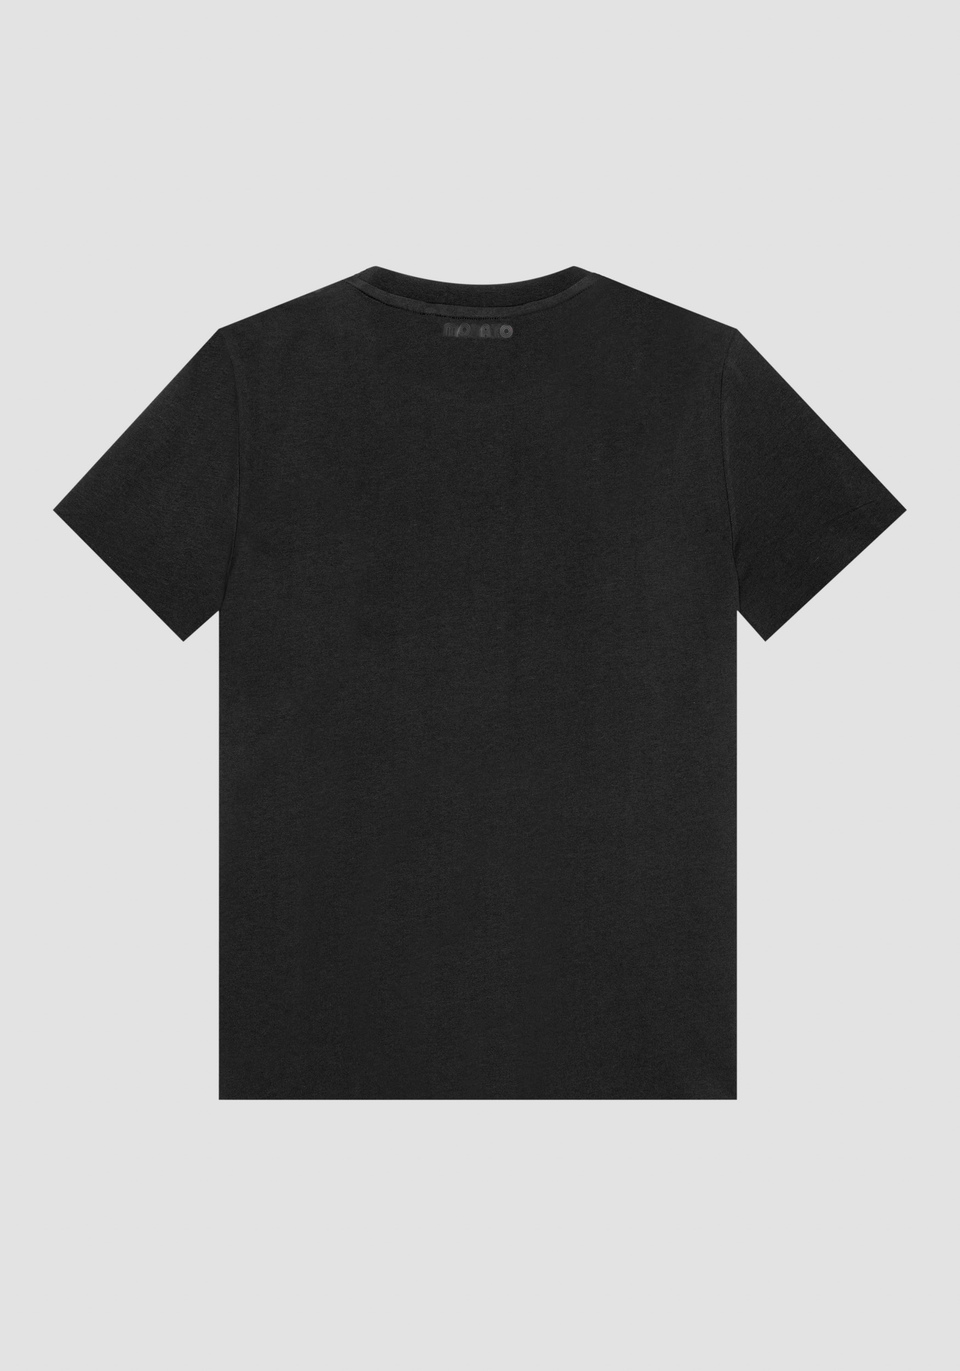 REGULAR FIT T-SHIRT IN COTTON JERSEY WITH MATTE RUBBERISED PLASTIC PRINT - Antony Morato Online Shop